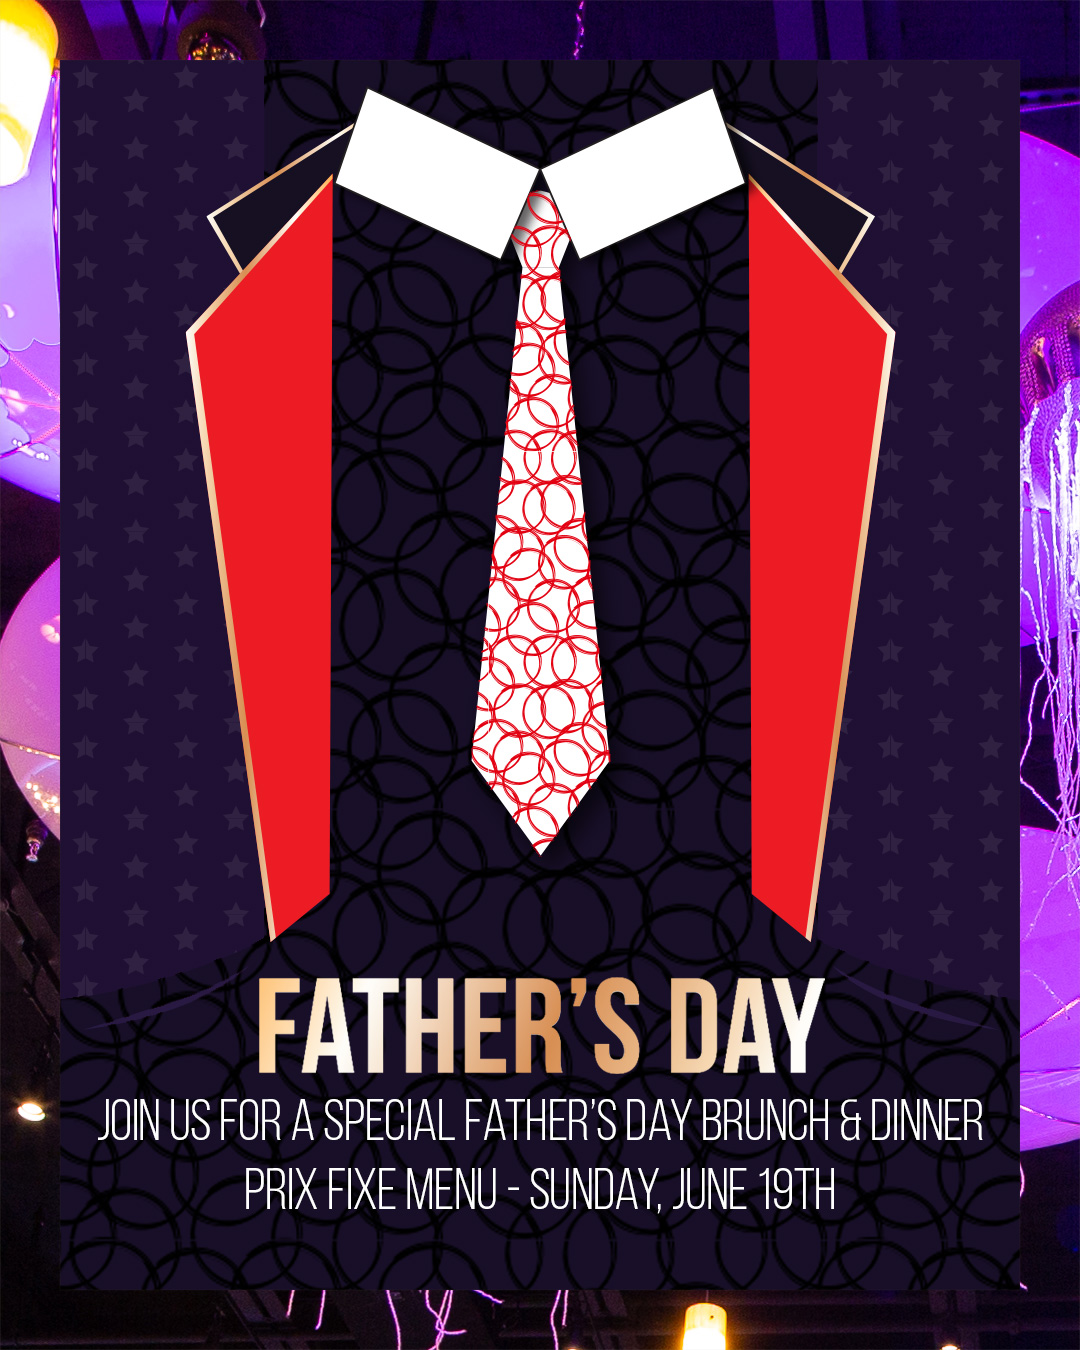 FATHER'S DAY JOIN US FOR A SPECIAL FATHER'S DAY BRUNCH & DINNER PRIX FIXE MENU - SUNDAY, JUNE 19TH